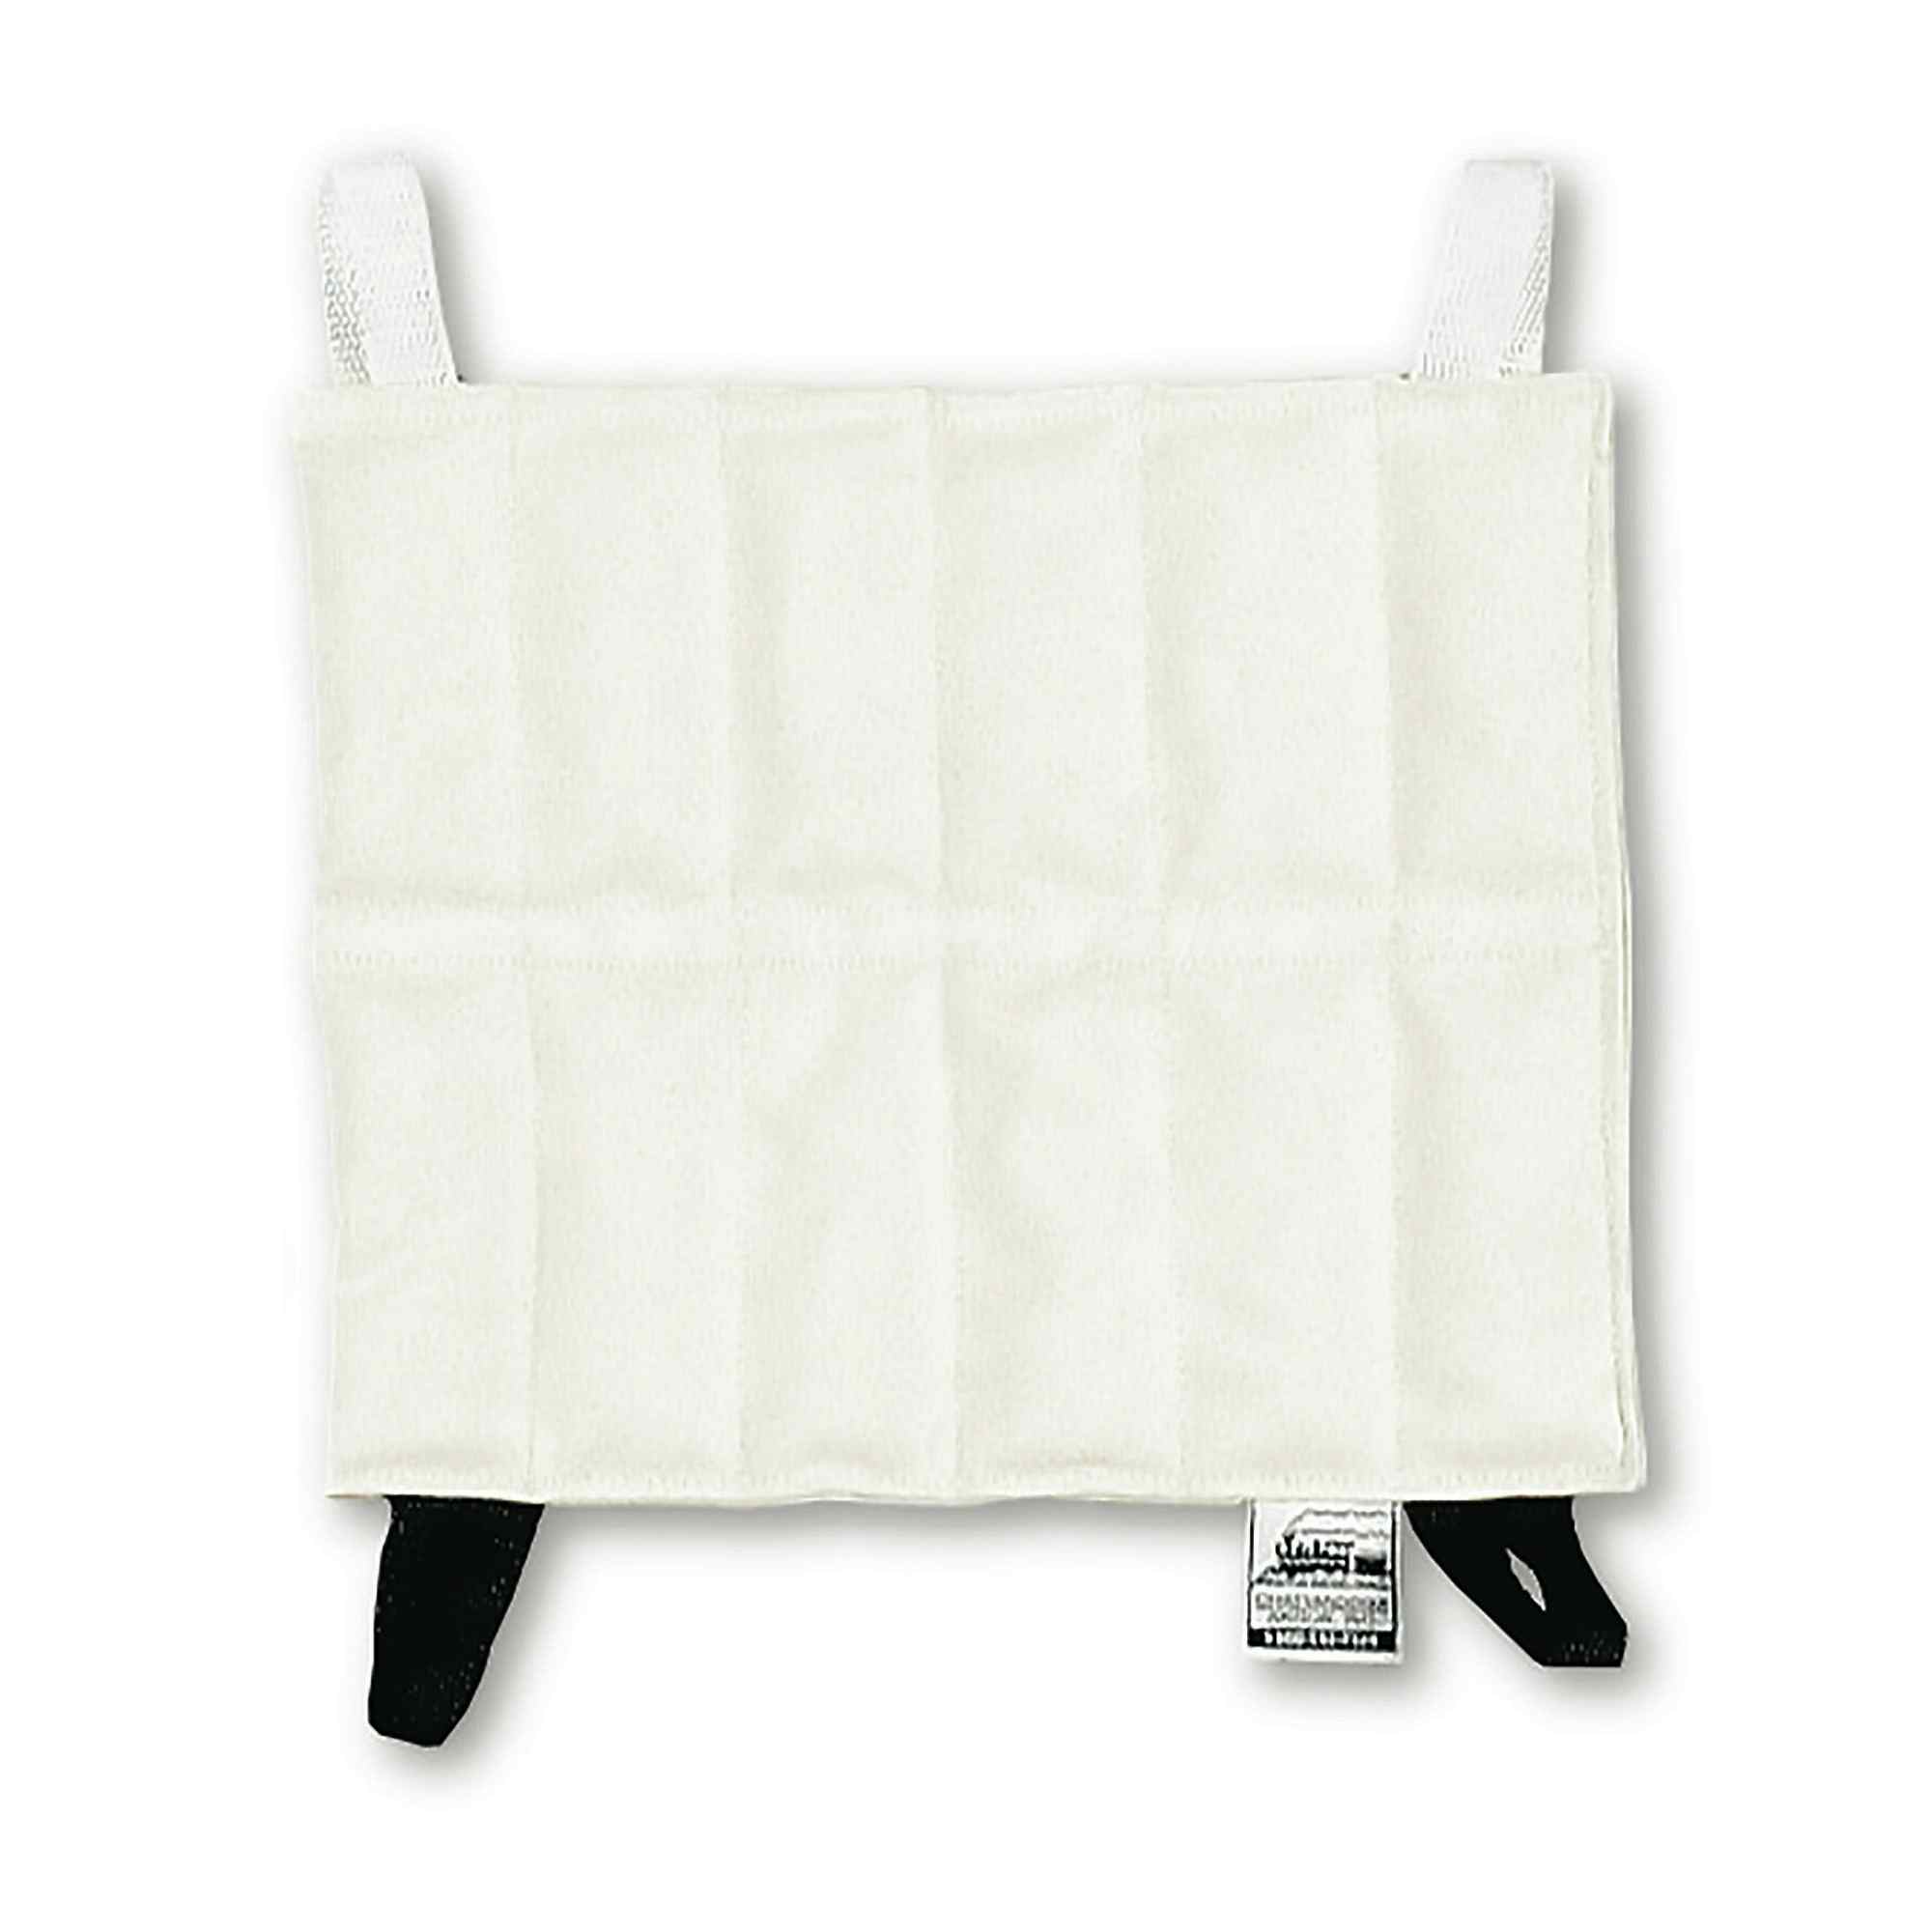 HotPac Canvas Reusable Moist Heat Therapy Pad